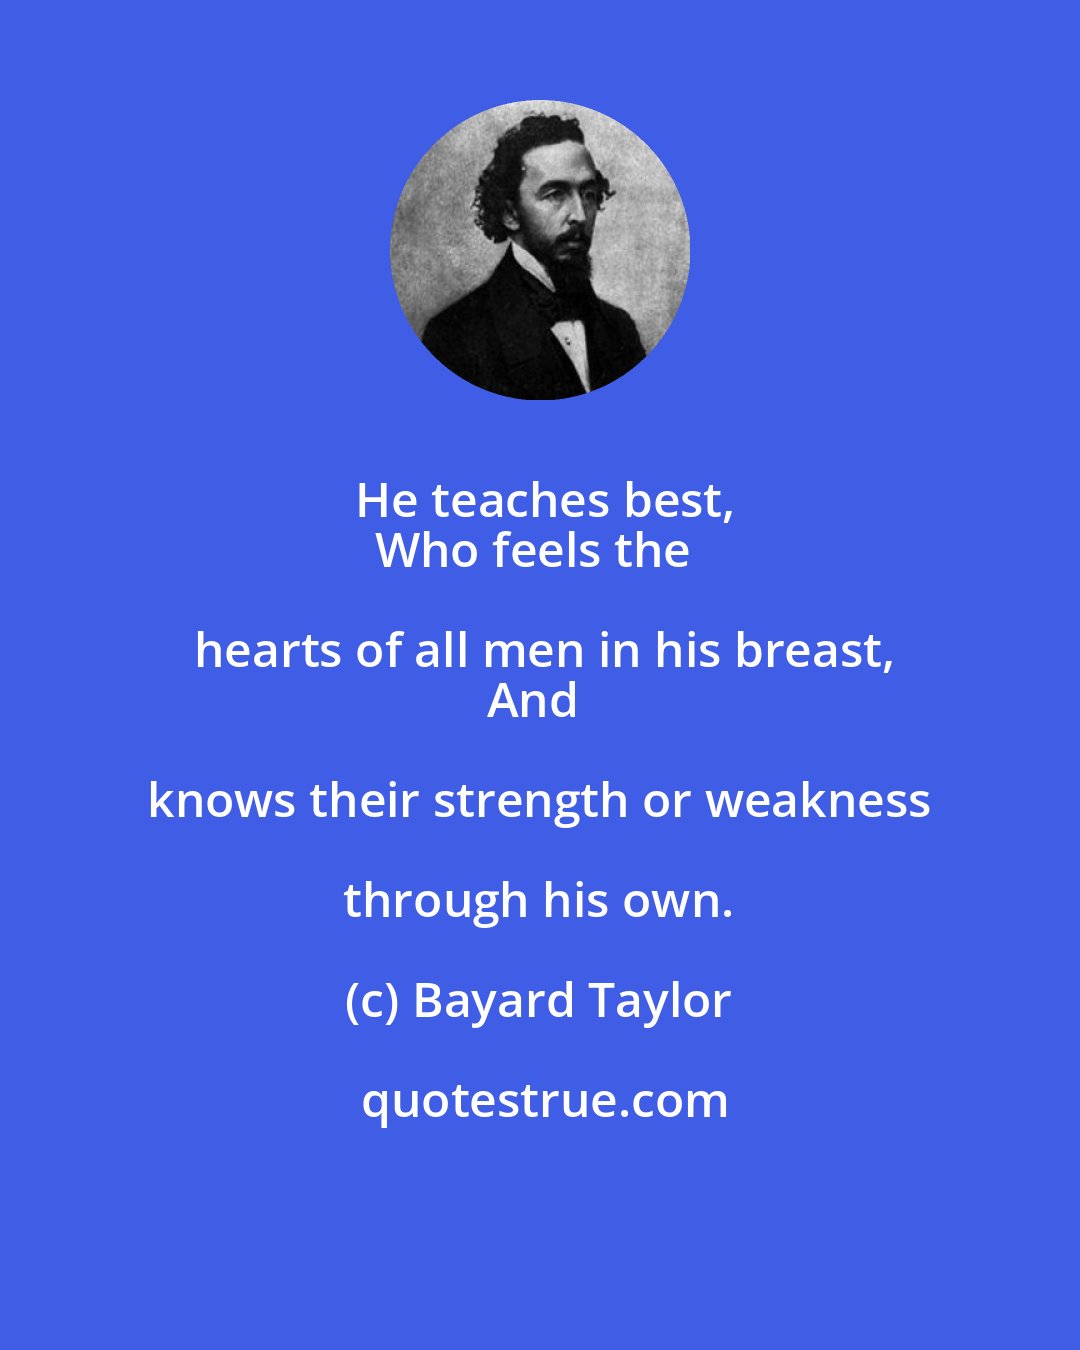 Bayard Taylor: He teaches best,
Who feels the hearts of all men in his breast,
And knows their strength or weakness through his own.